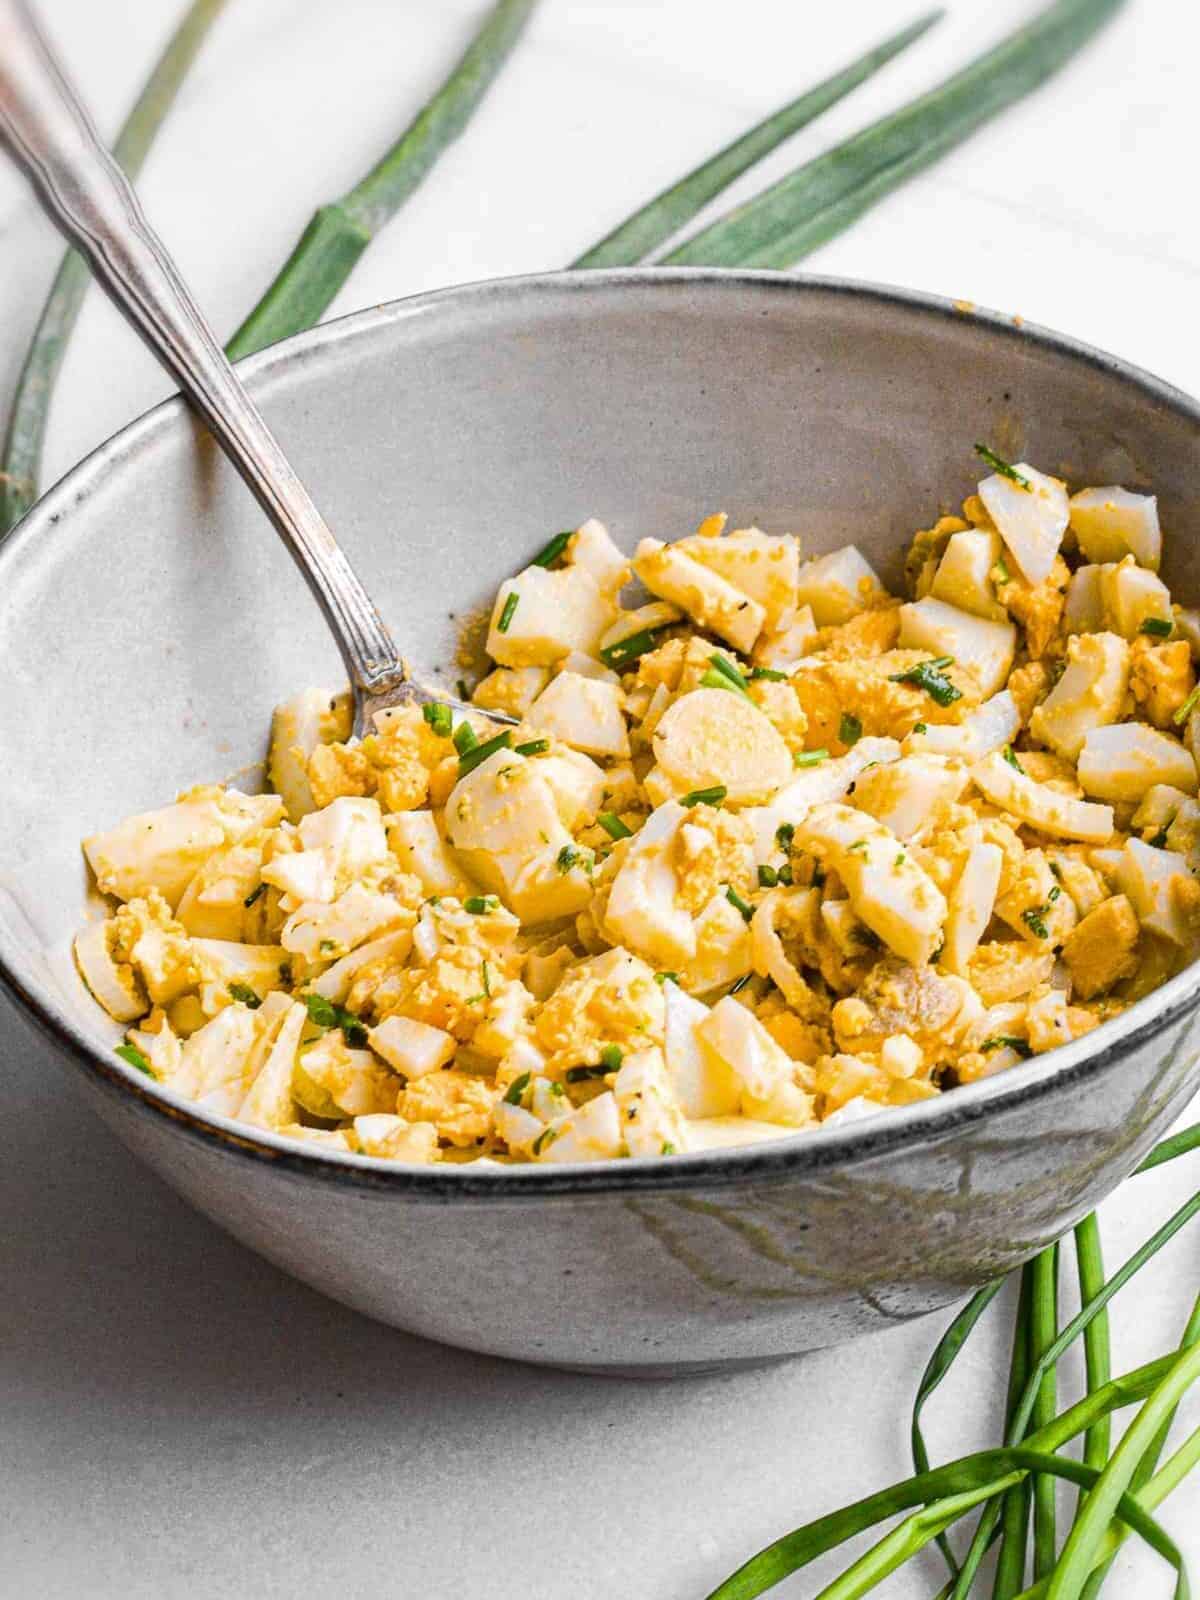 Homemade egg salad in a bowl with a spoon